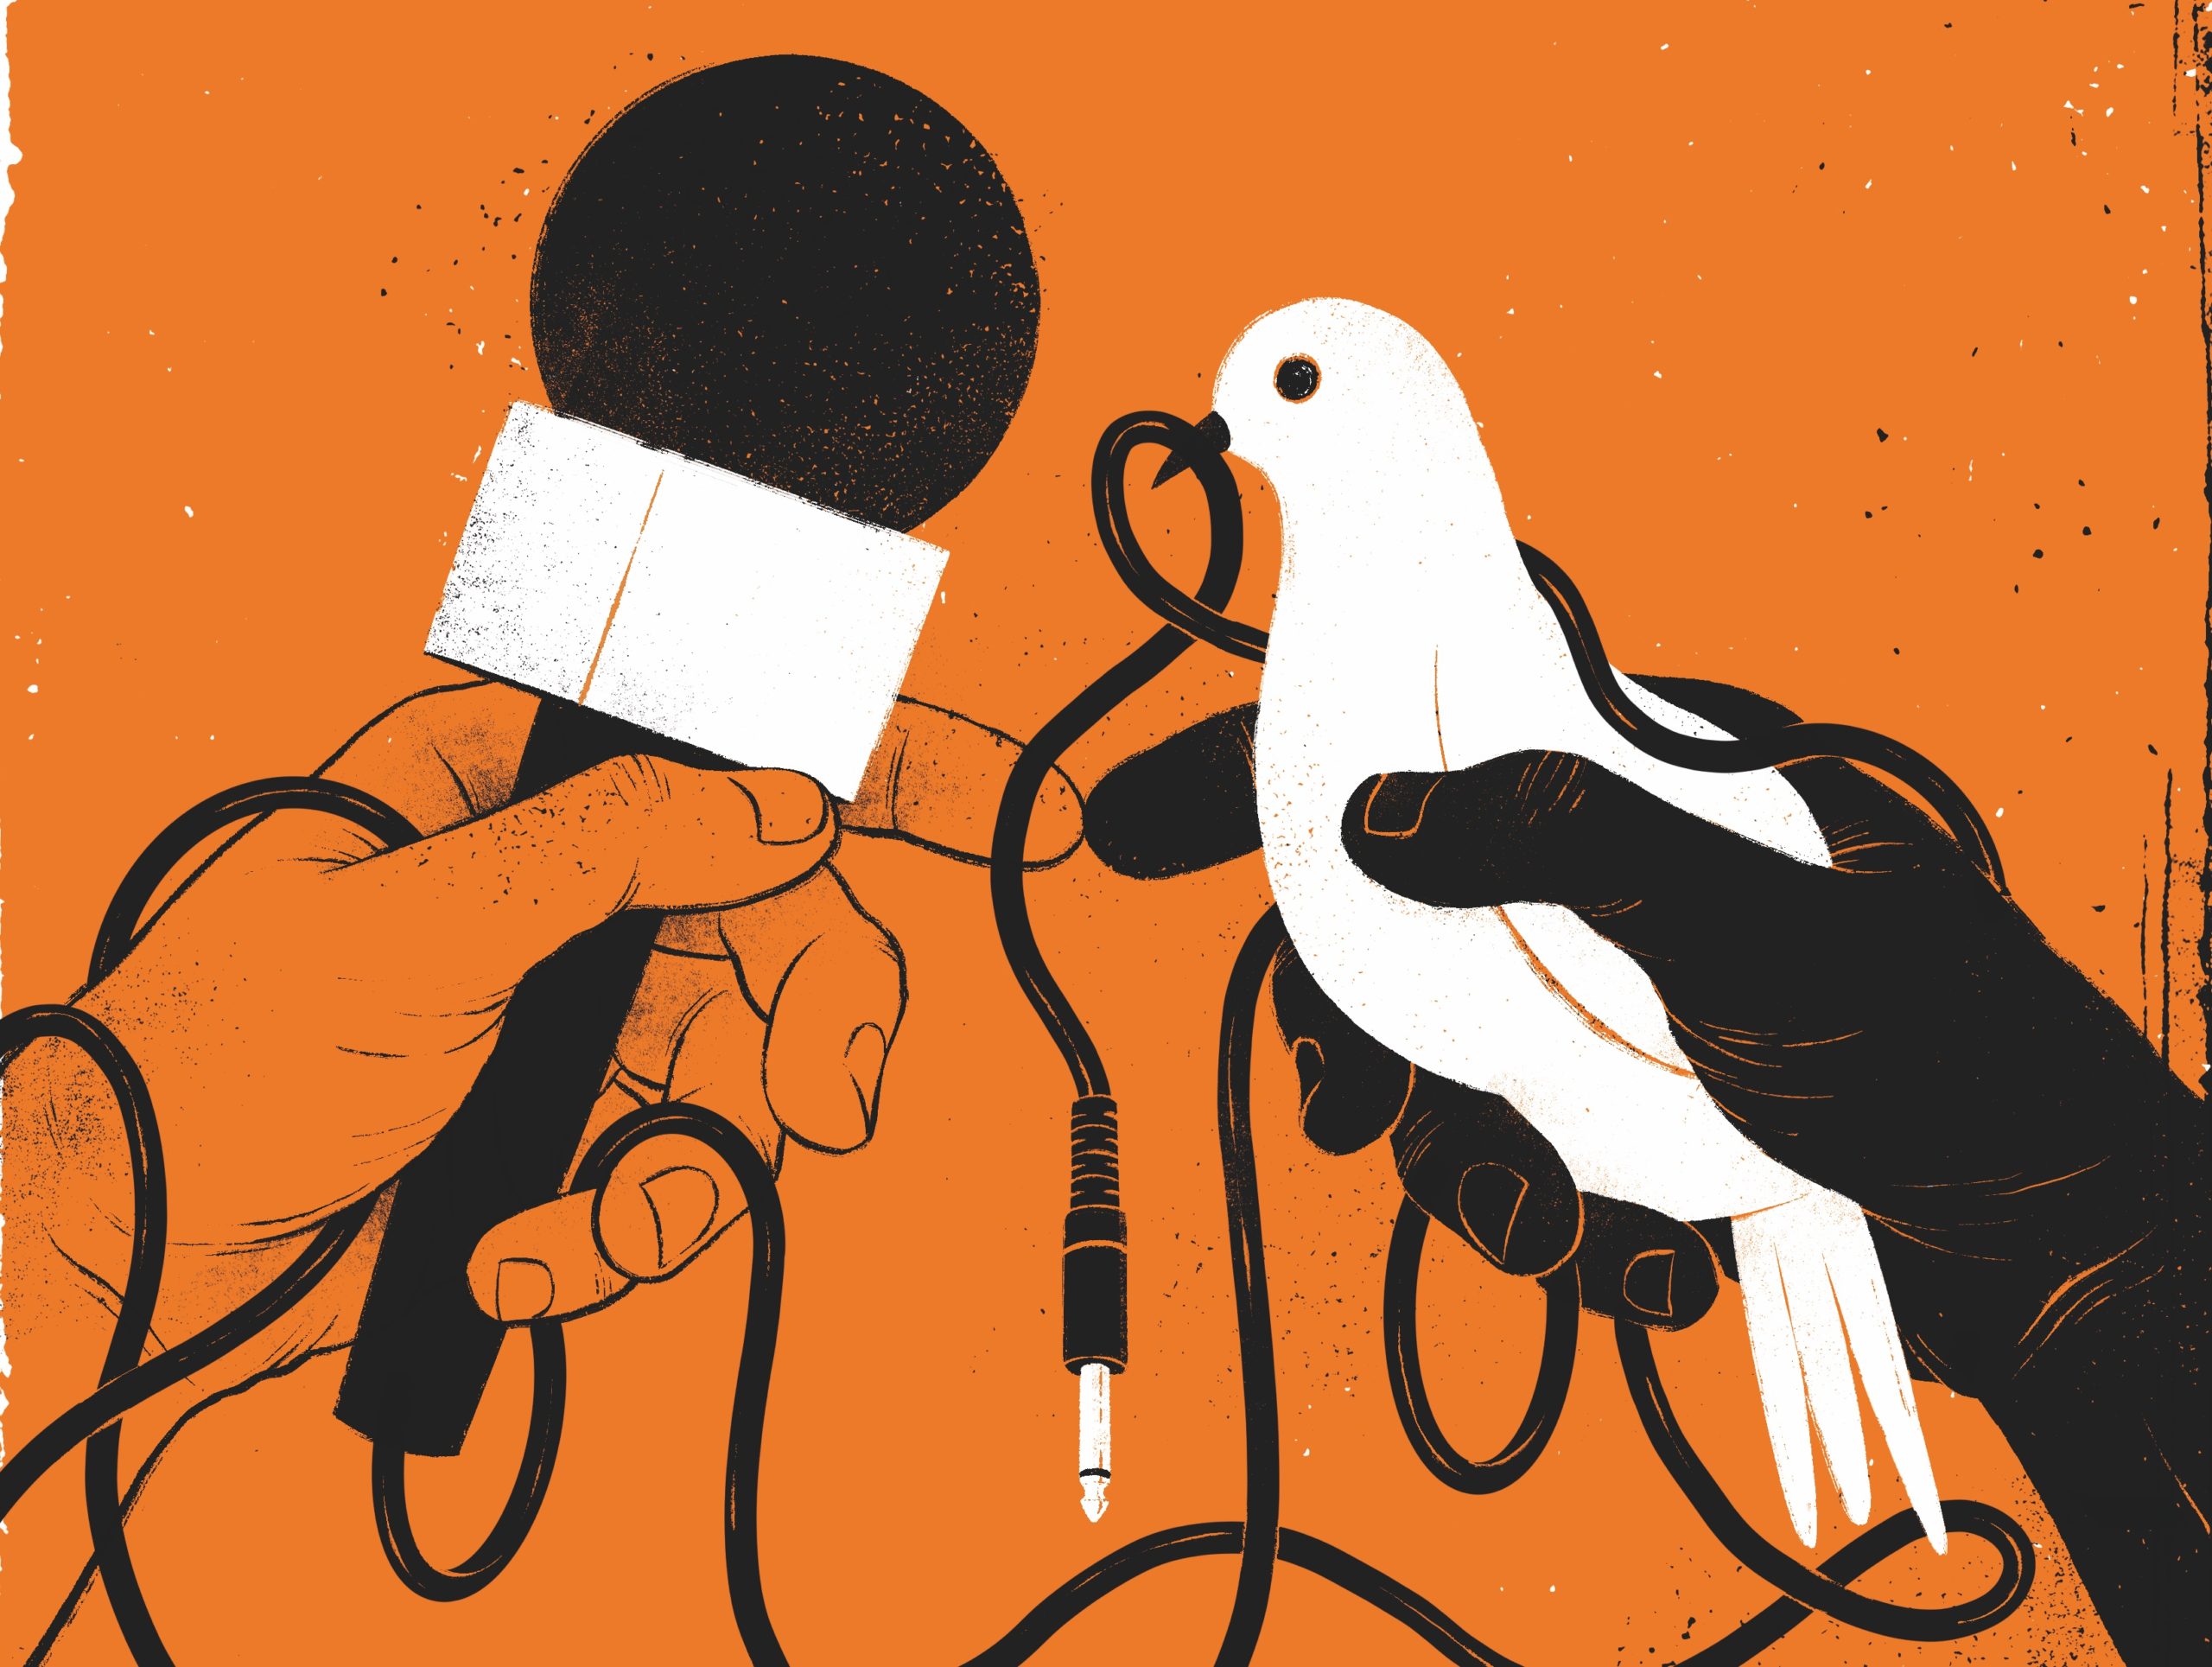 On an organze background, a black and white illustration shows two hands, the left holding a microphone and the white holding a dove, with the dove holding the microphone cord in its beak